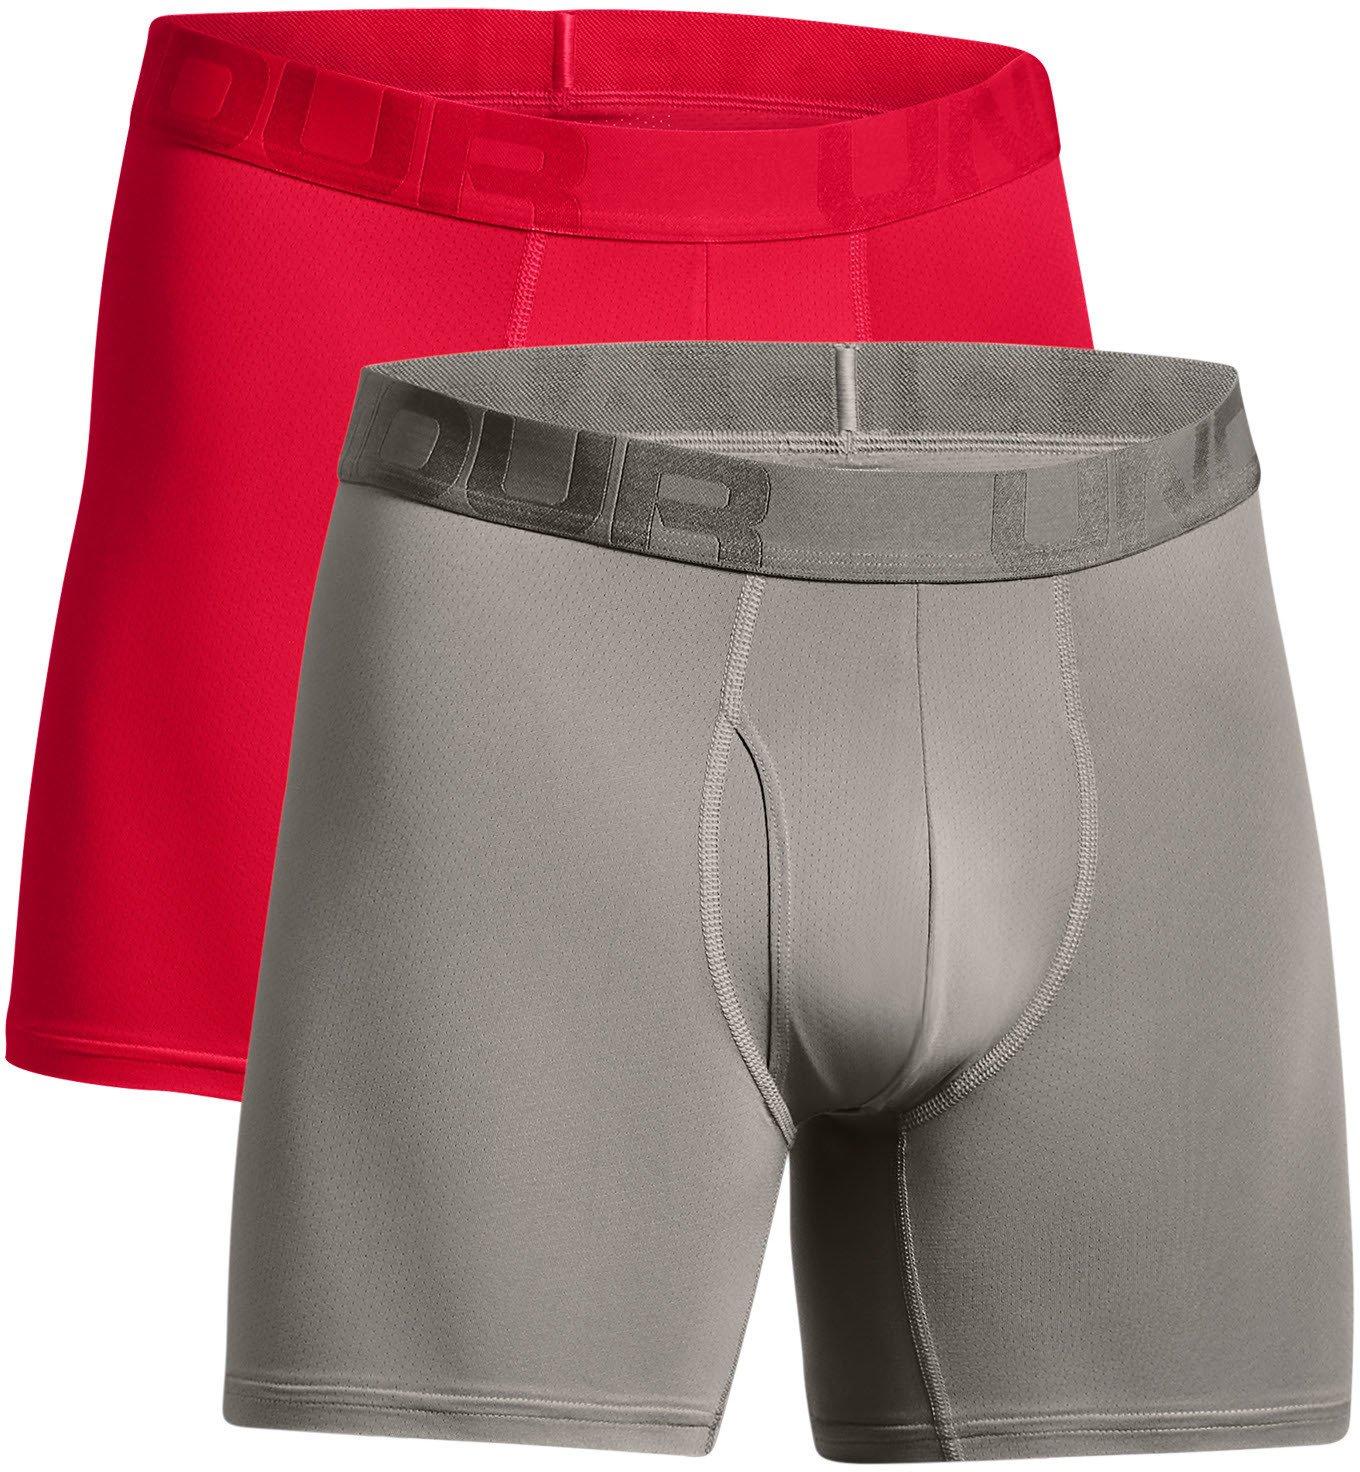 Under Armour Tech Mesh 6in 2 Pack-RED S